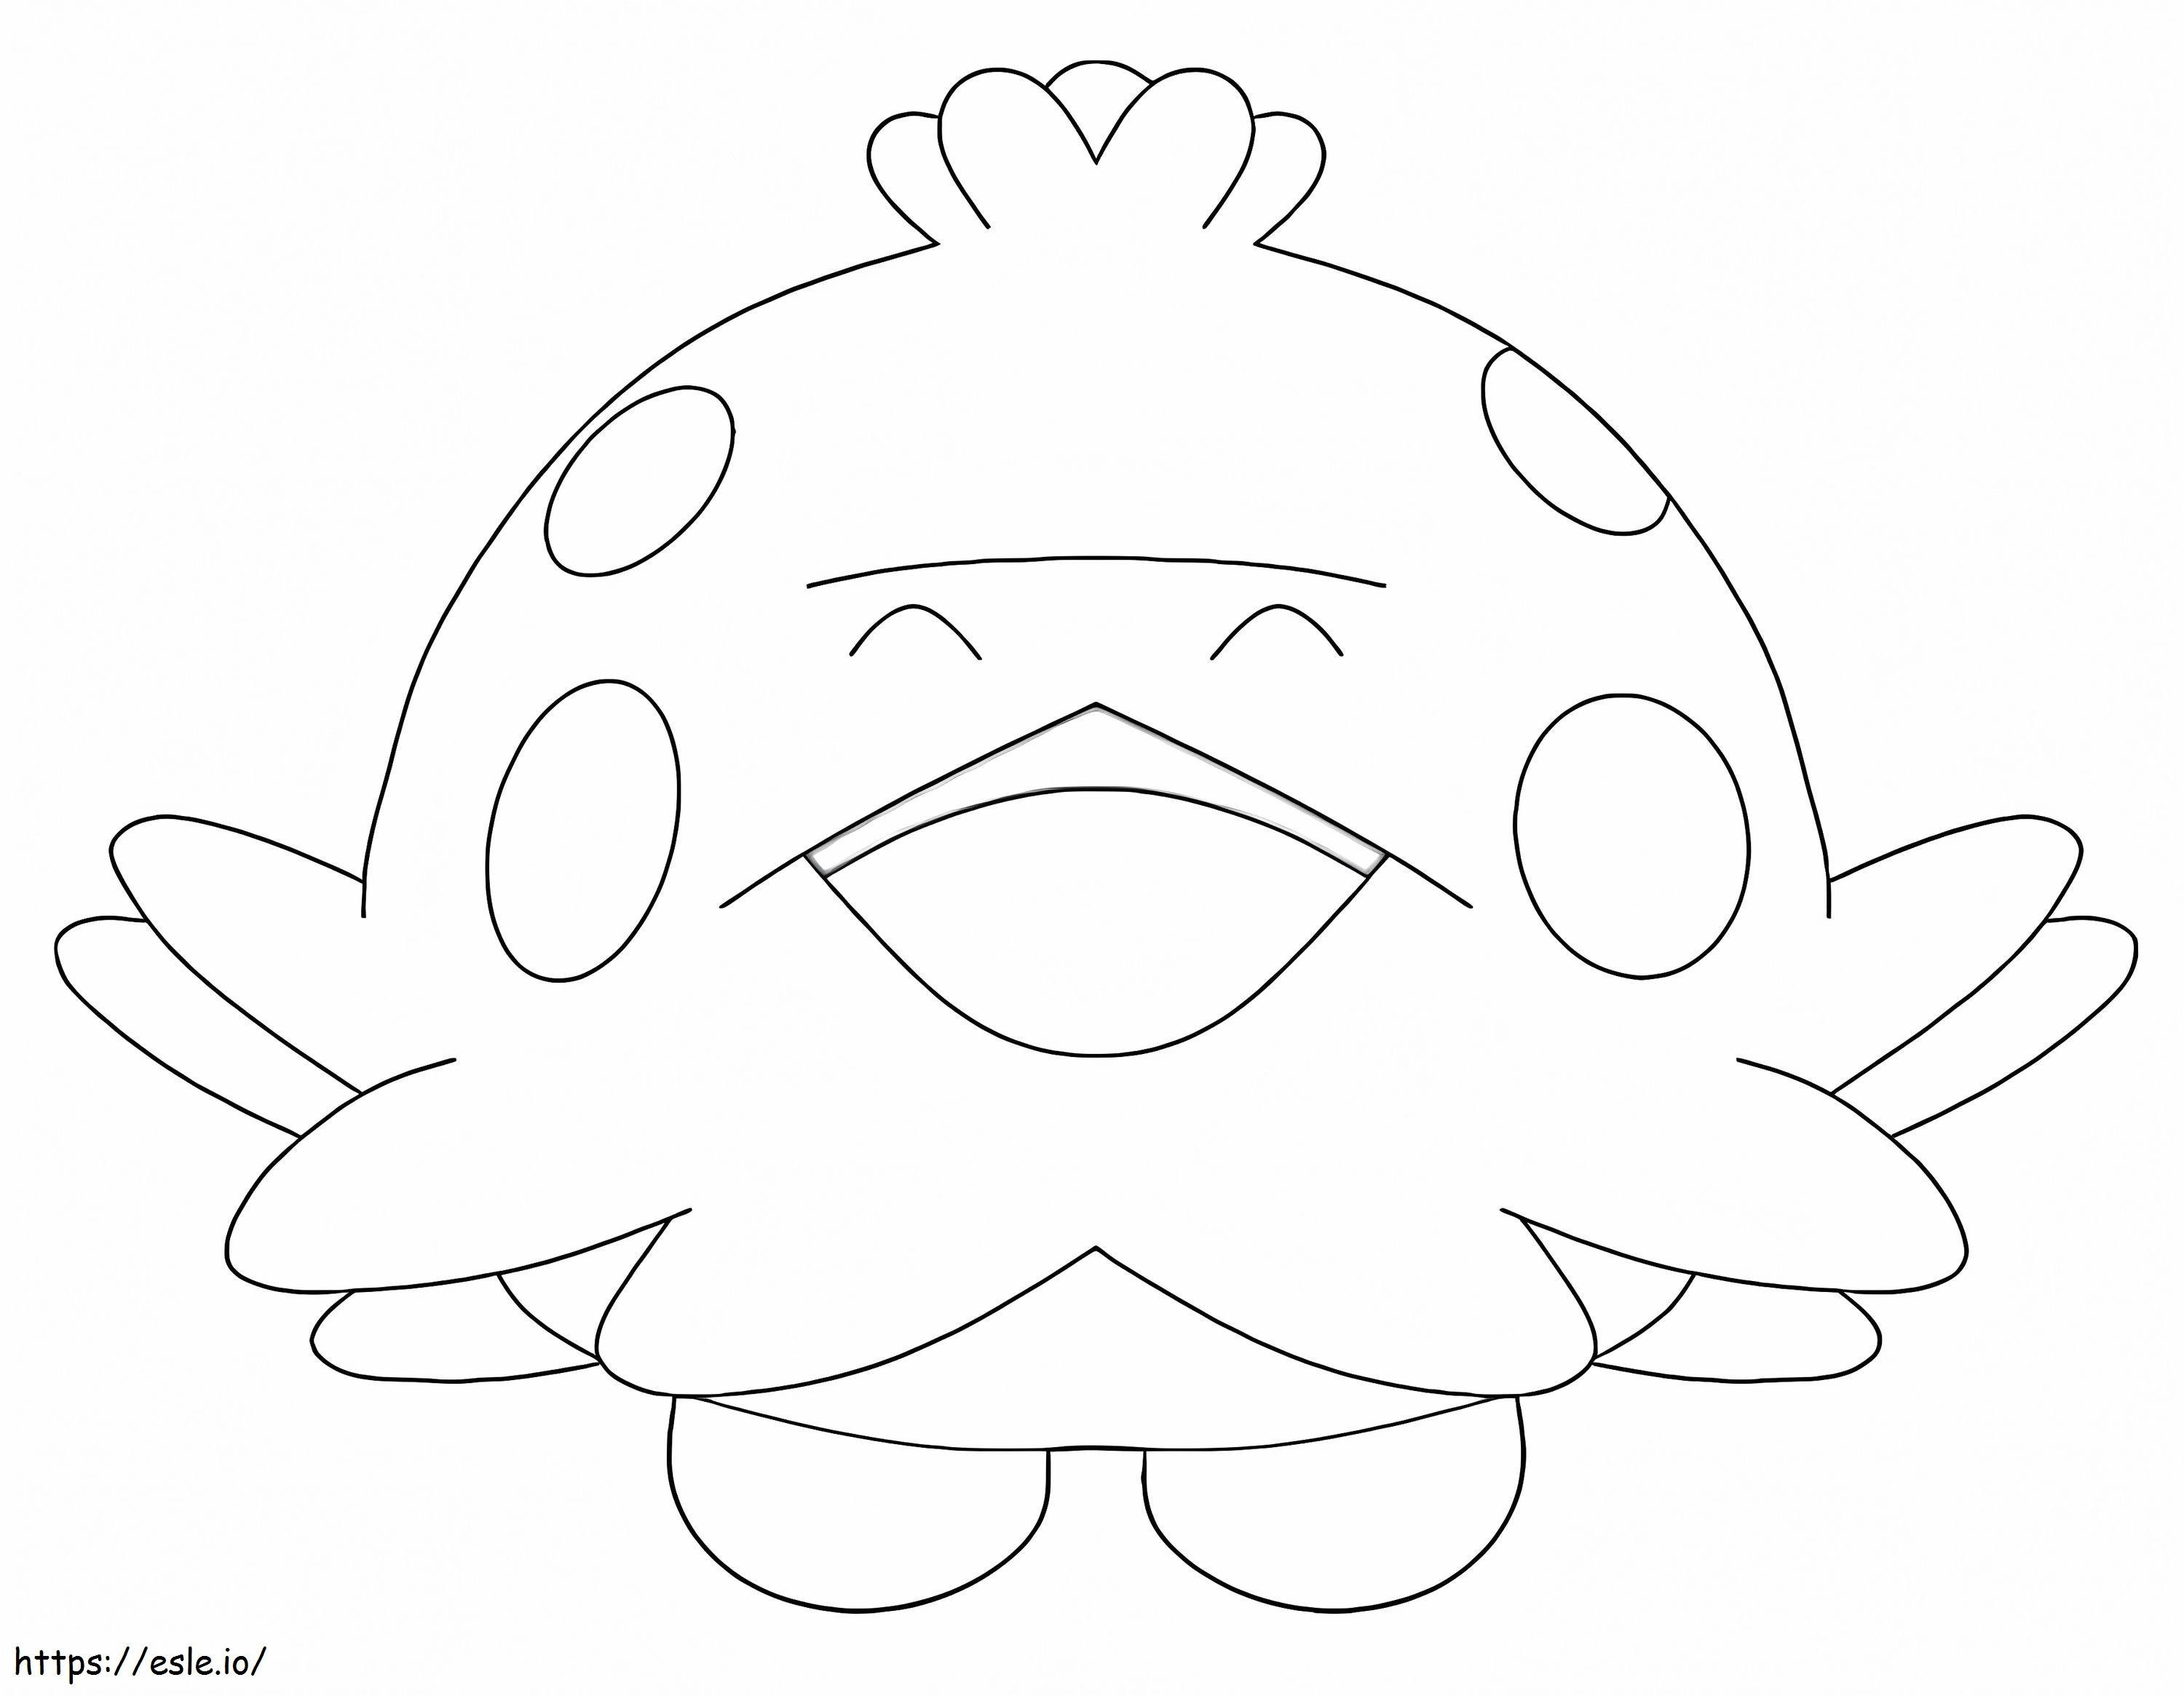 Shroomish coloring page